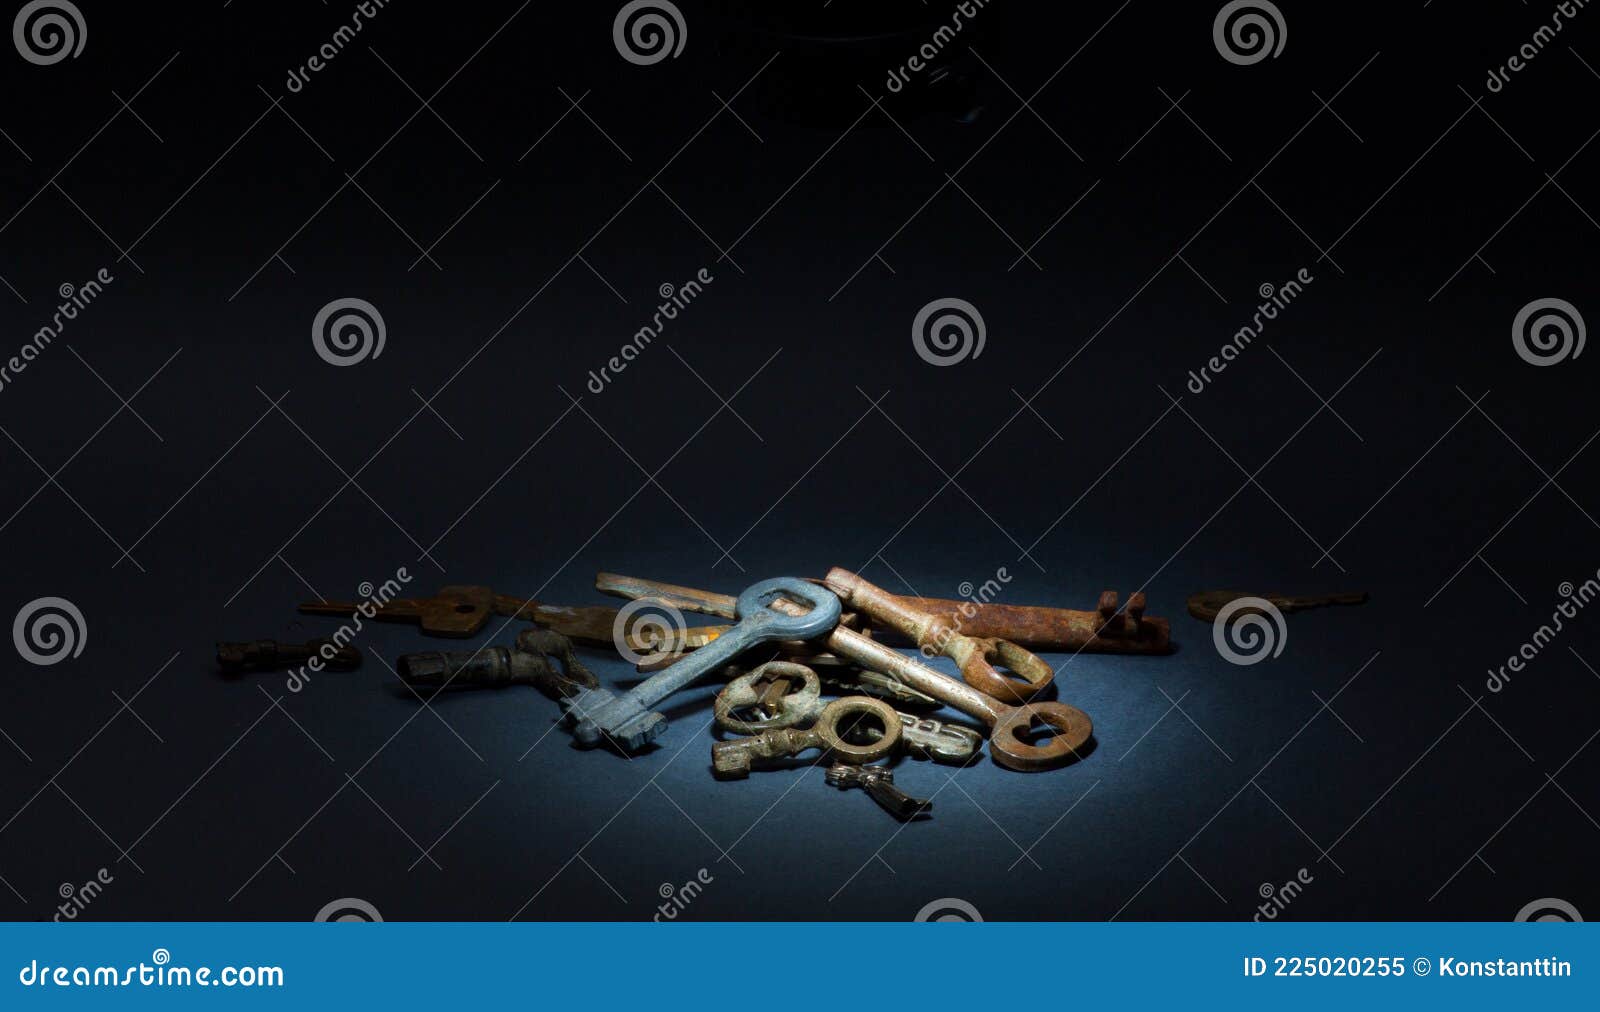 art bunch of old unnecessary keys on a dark background. obsolete technology concept